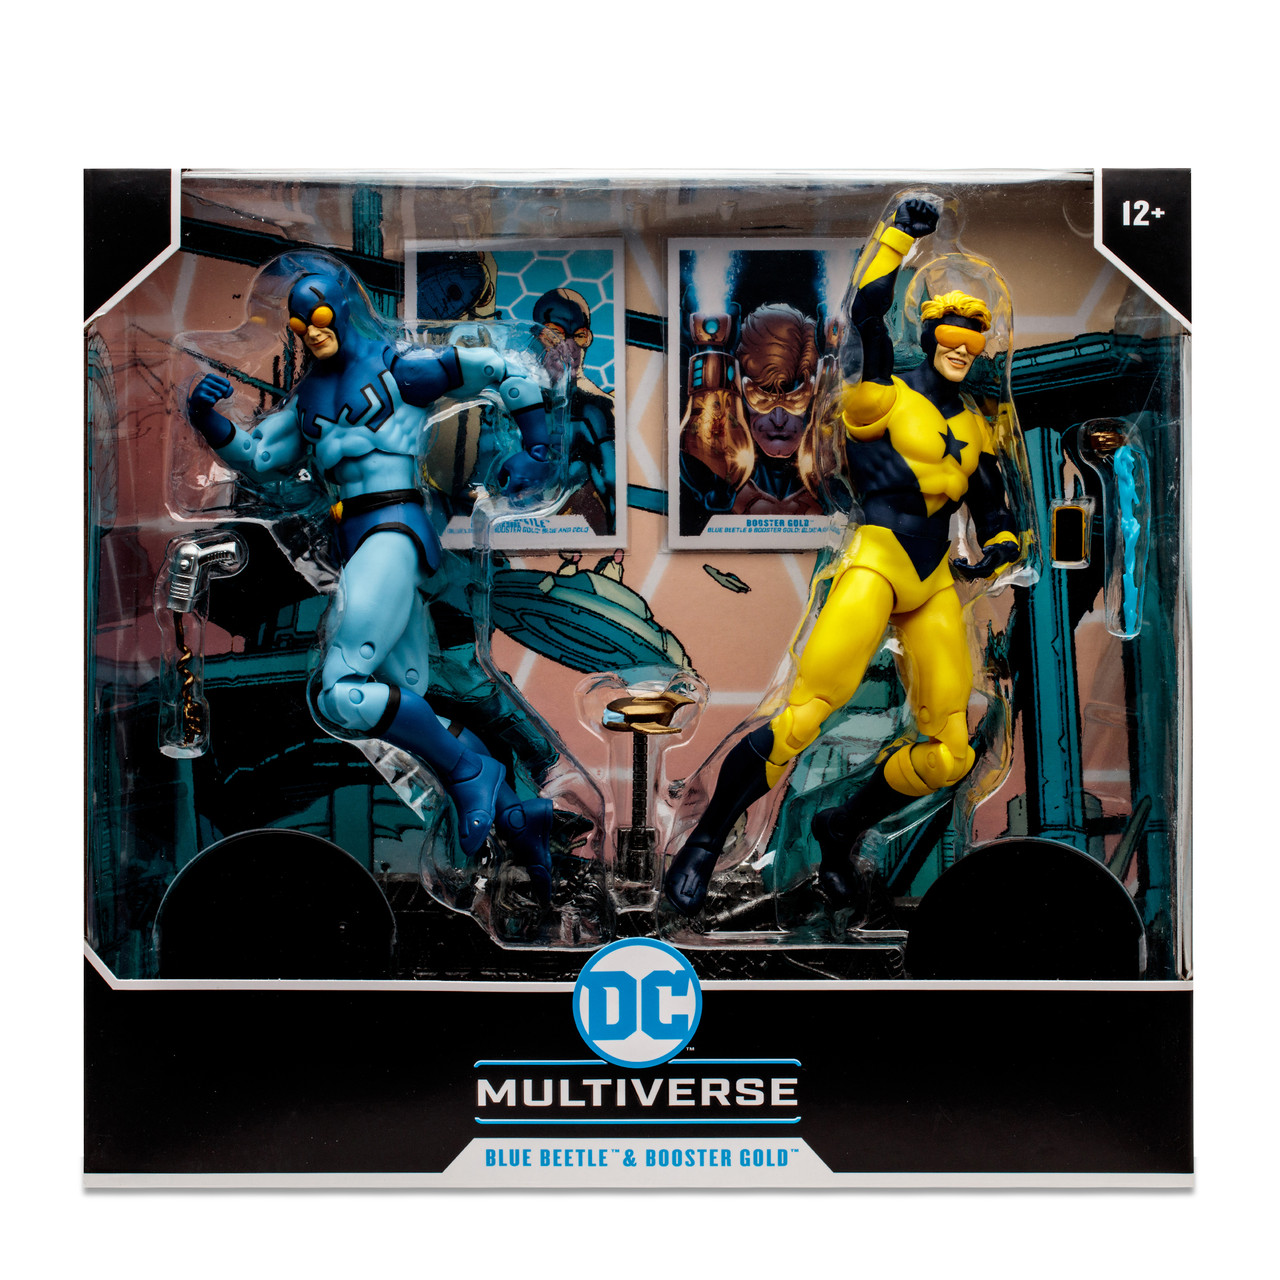 Blue Beetle vs Booster Gold #2-Pack (DC Super Heroes) POP! Heroes by F